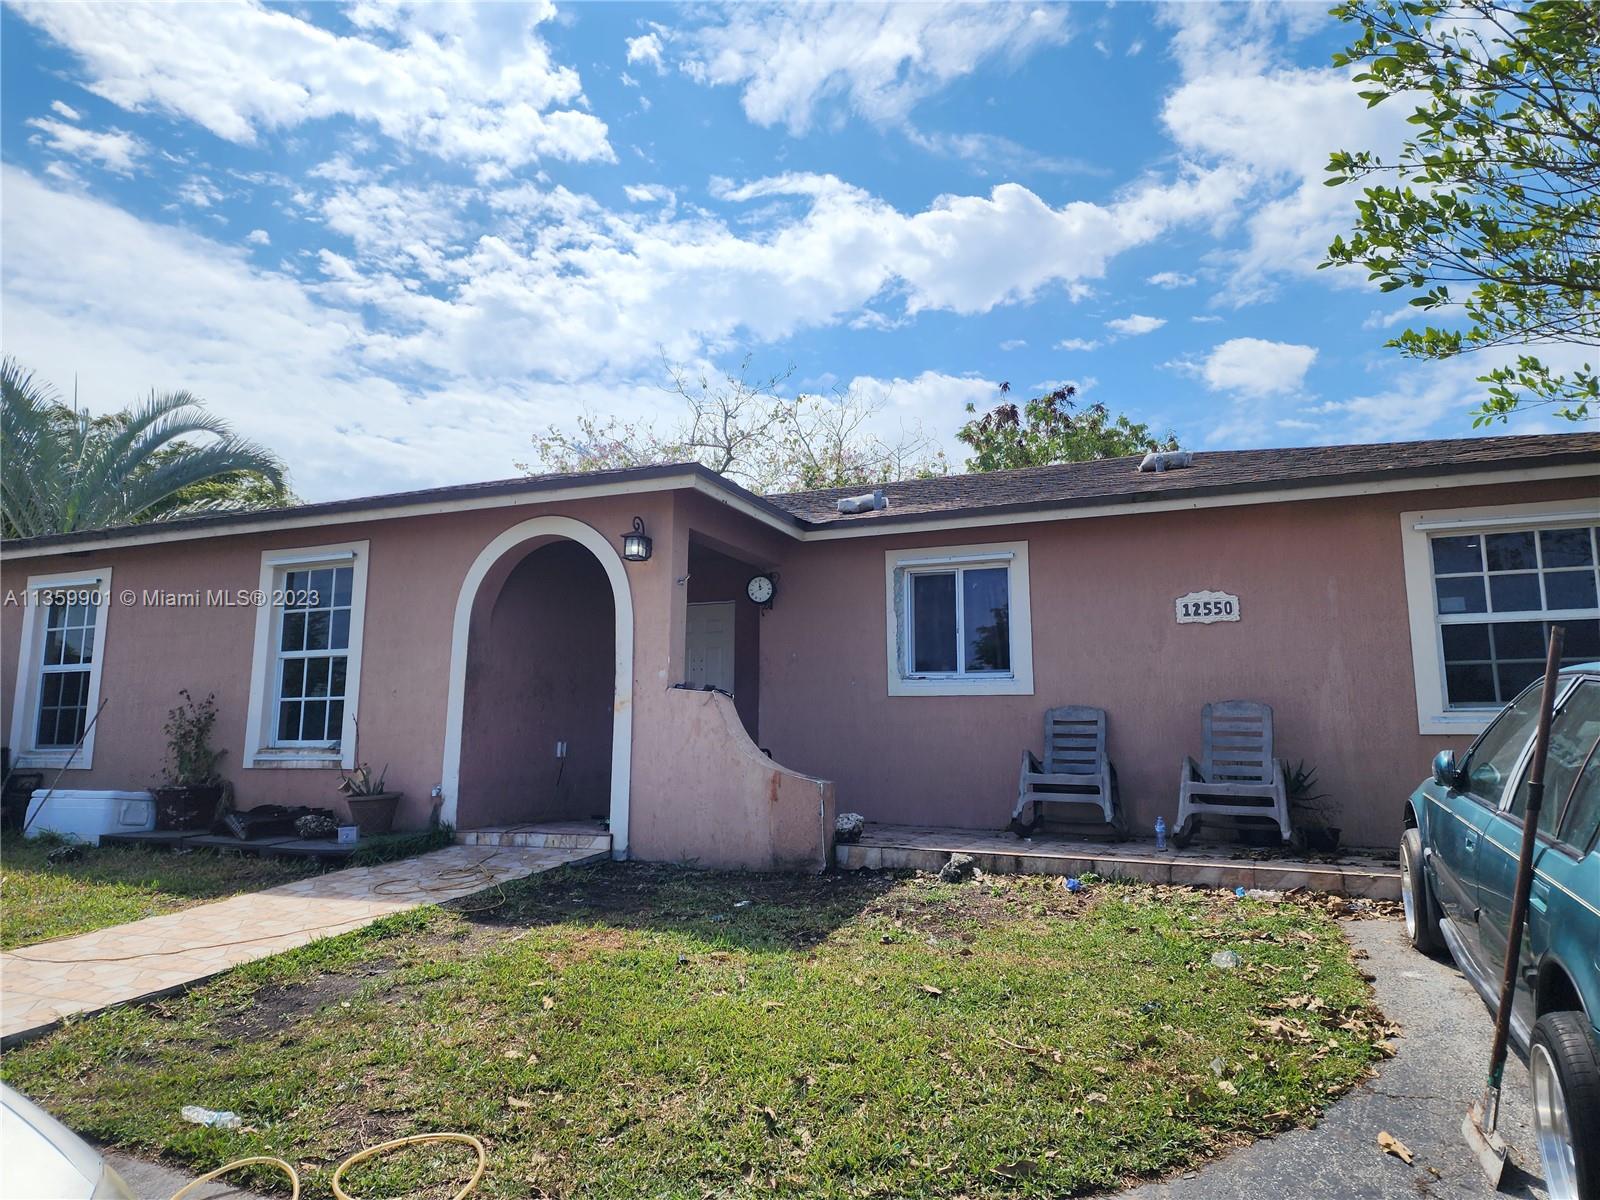 Huge potential home 4 beds, 2 baths with a closed den that could be a fourth bedroom in an excellent area.  Tile all throughout the house. Roof and AC is from 2016. No HOA. Very close to Turnpike.